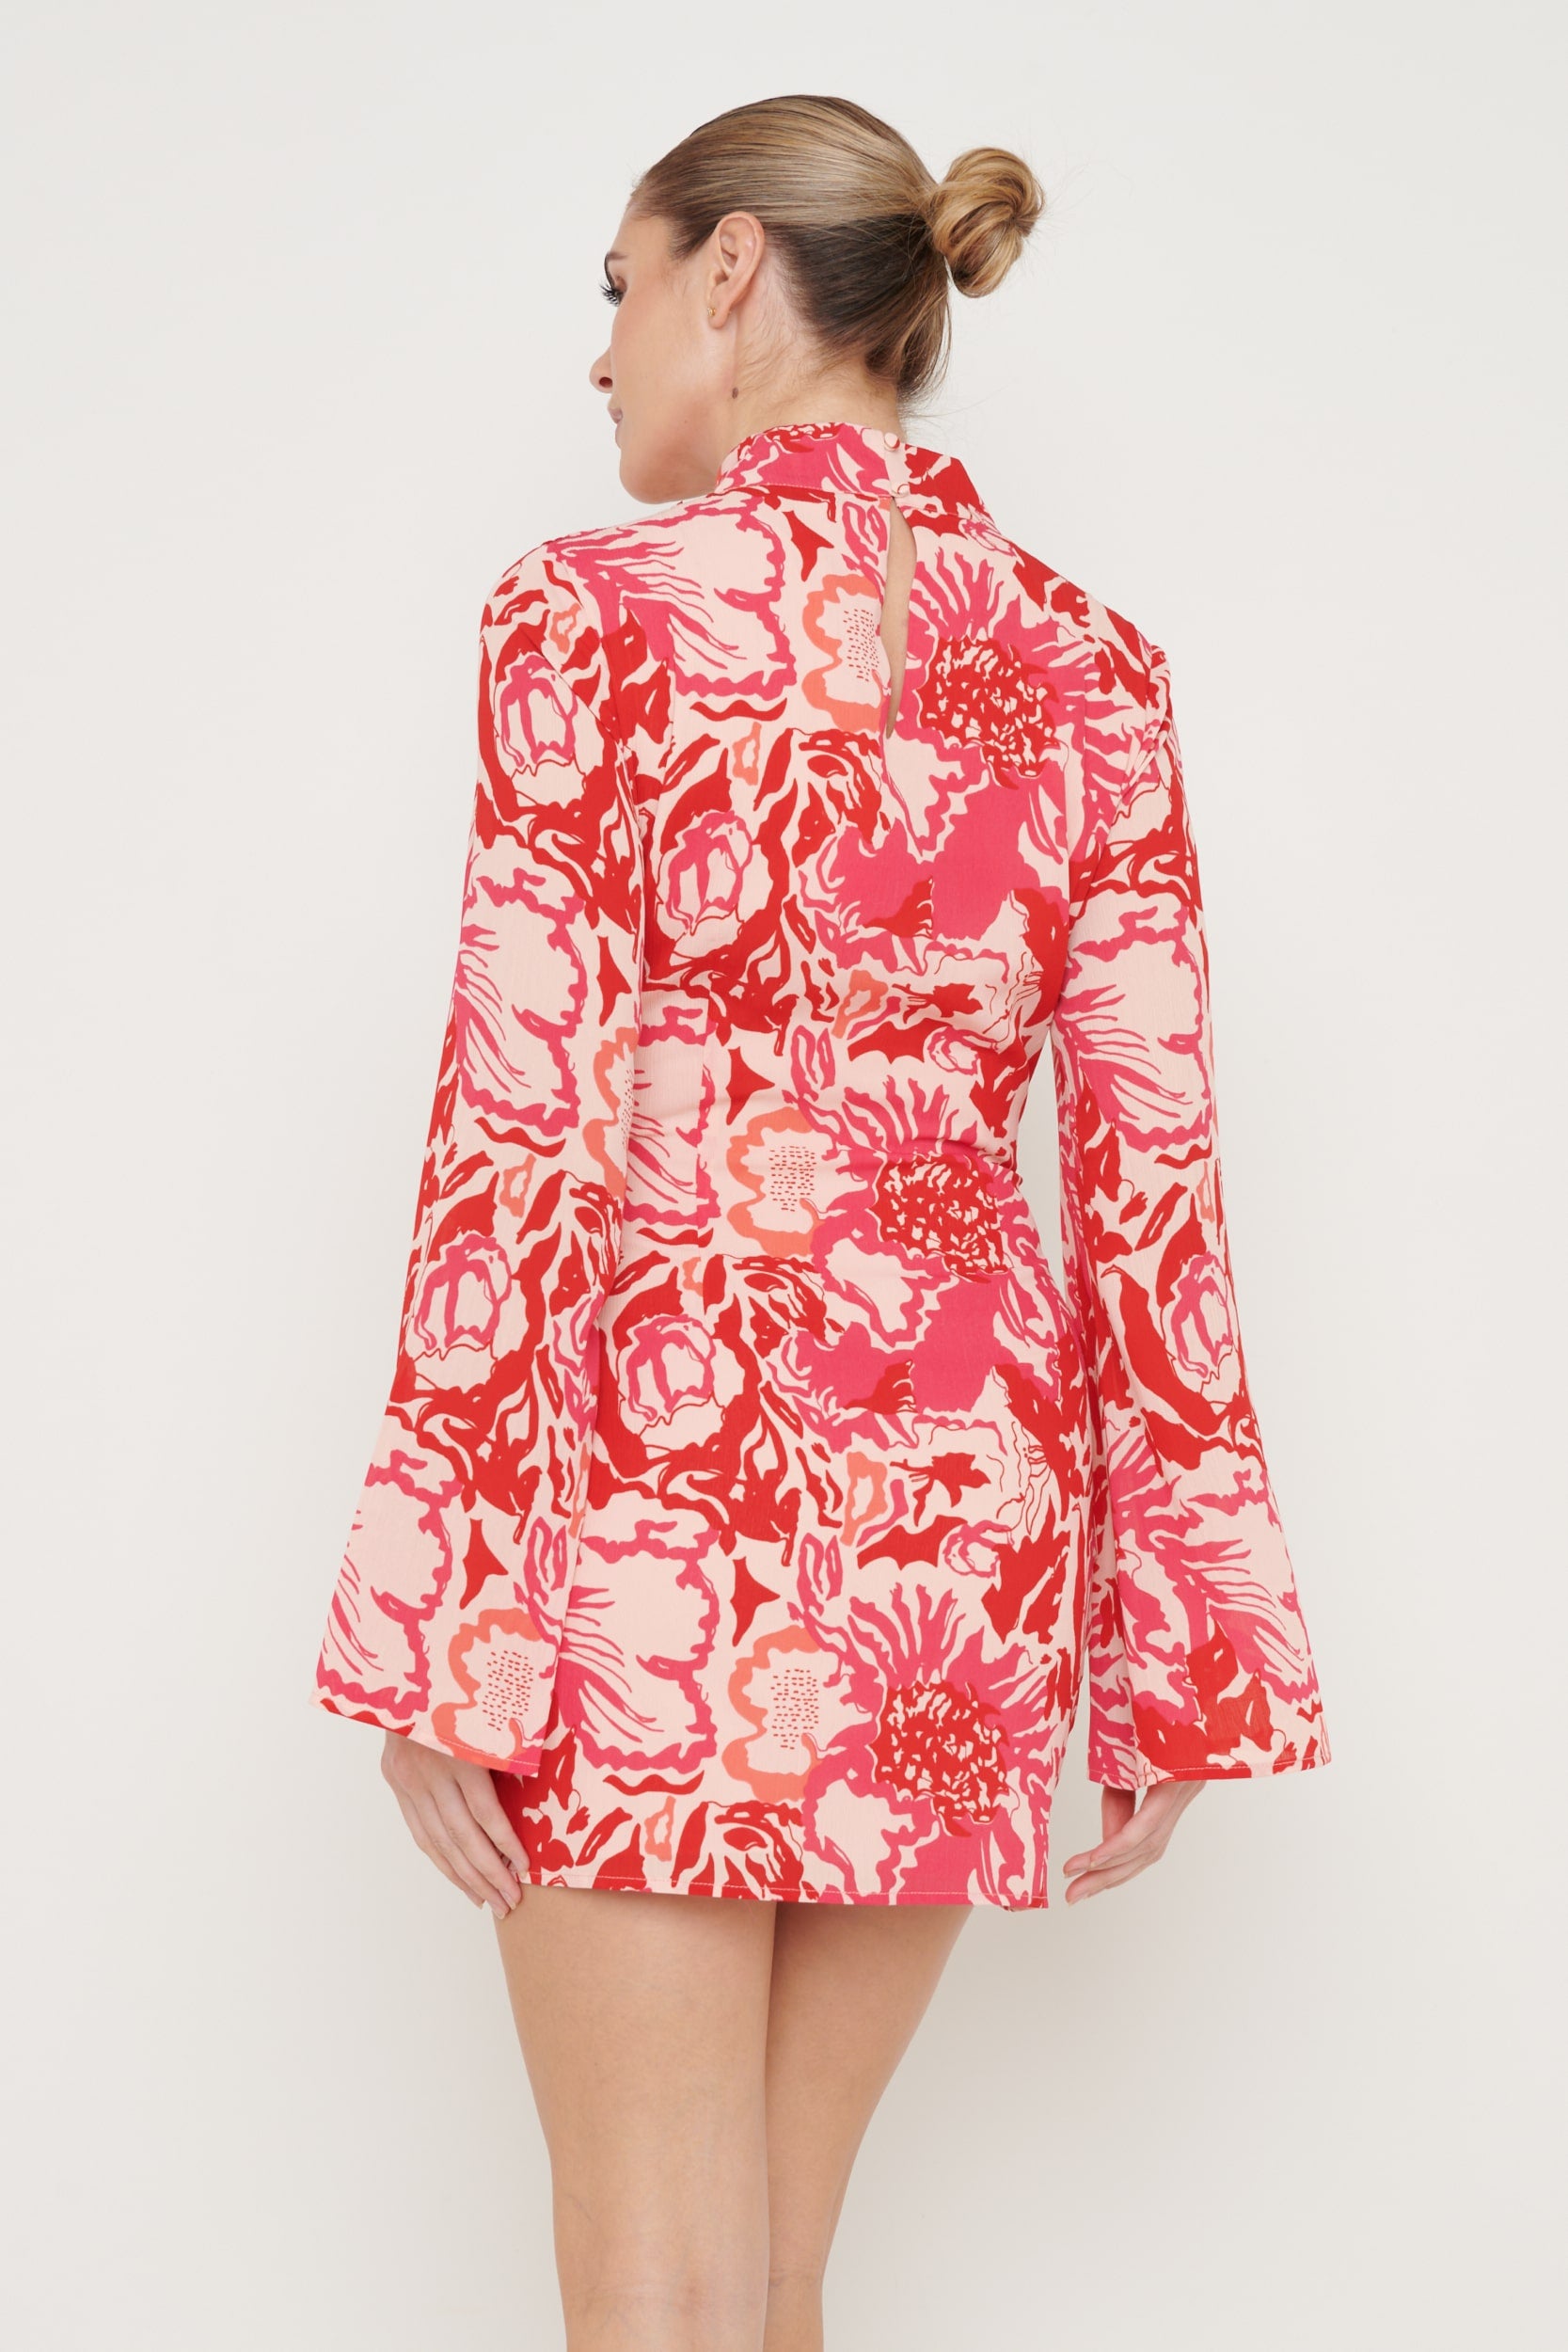 Athene Cut Out Mini Dress - Pink and Red Floral